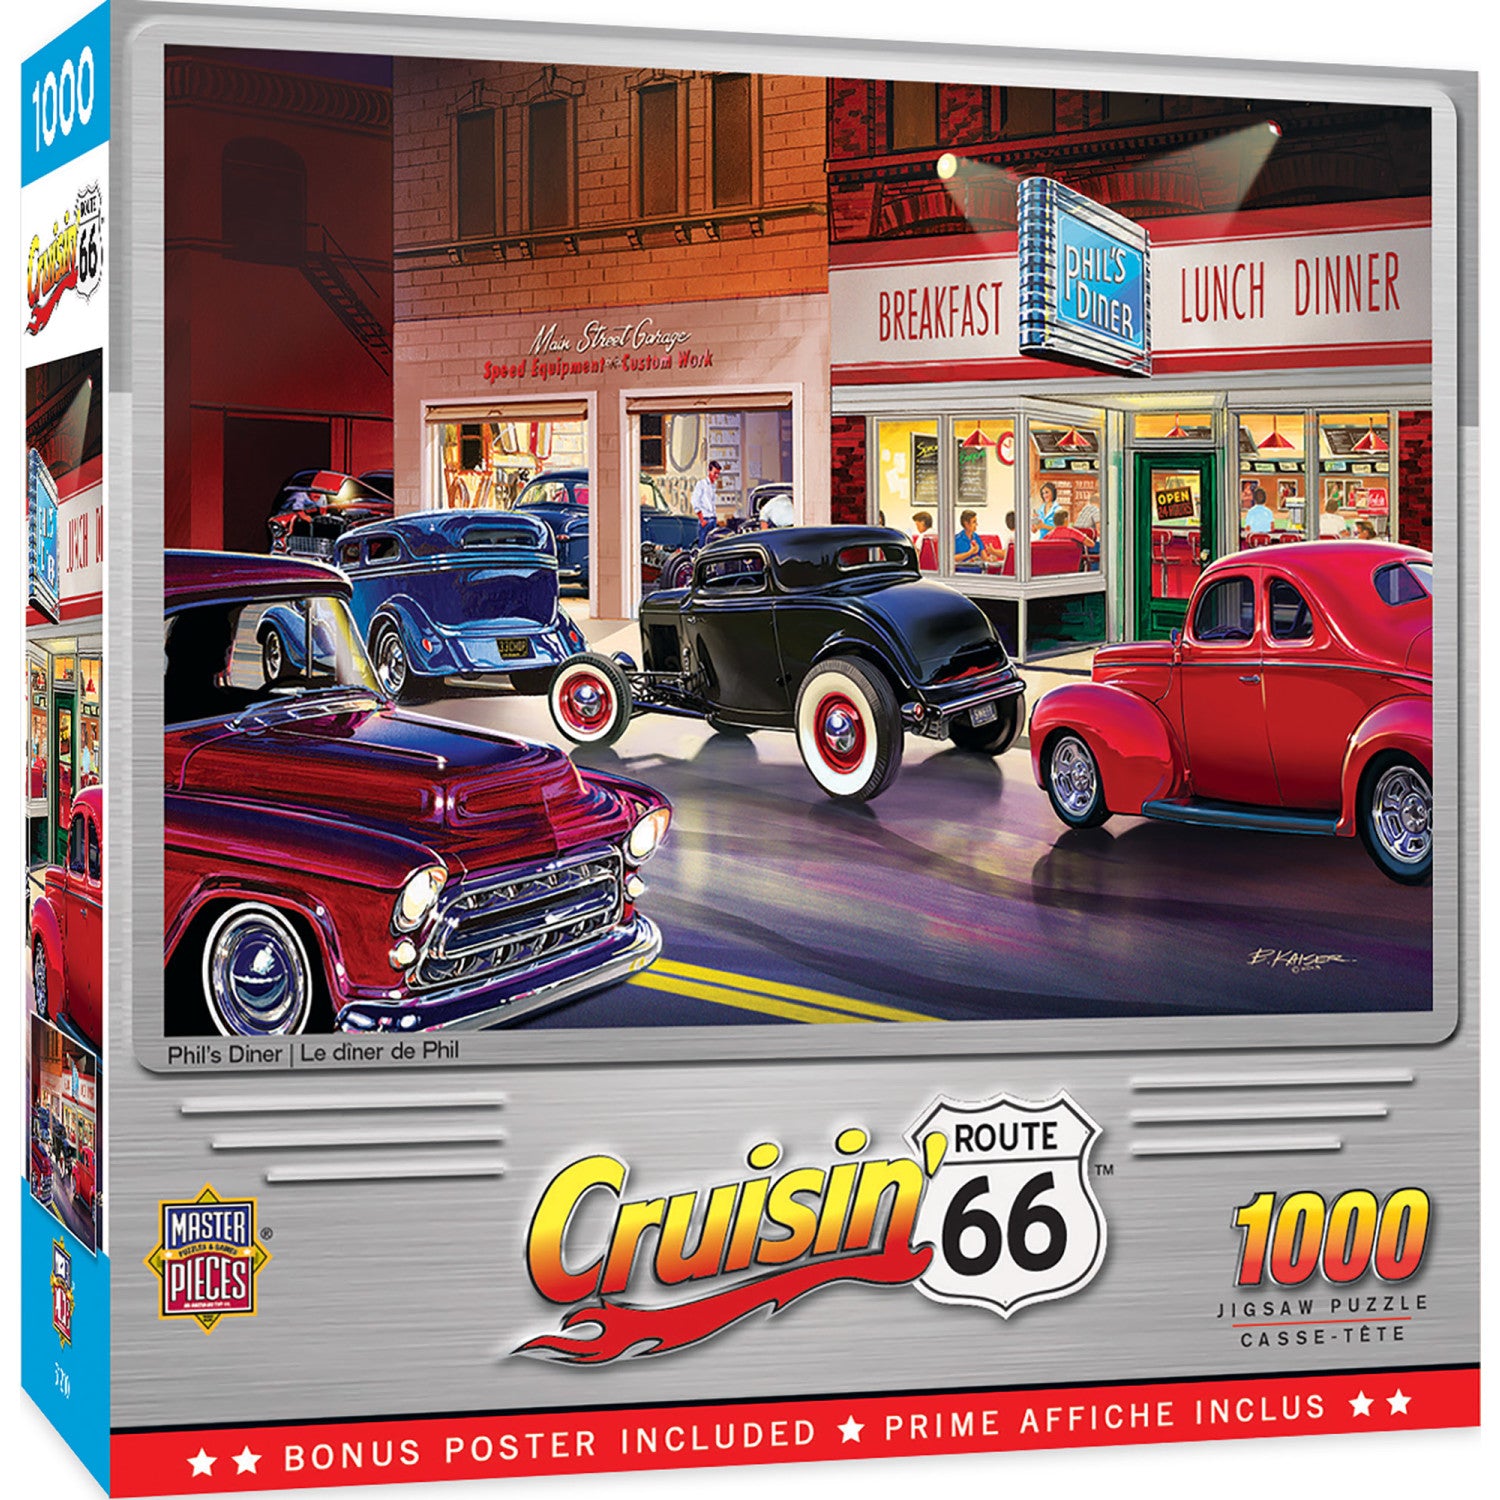 Cruisin' Route 66 - Phil's Diner 1000 Piece Jigsaw Puzzle